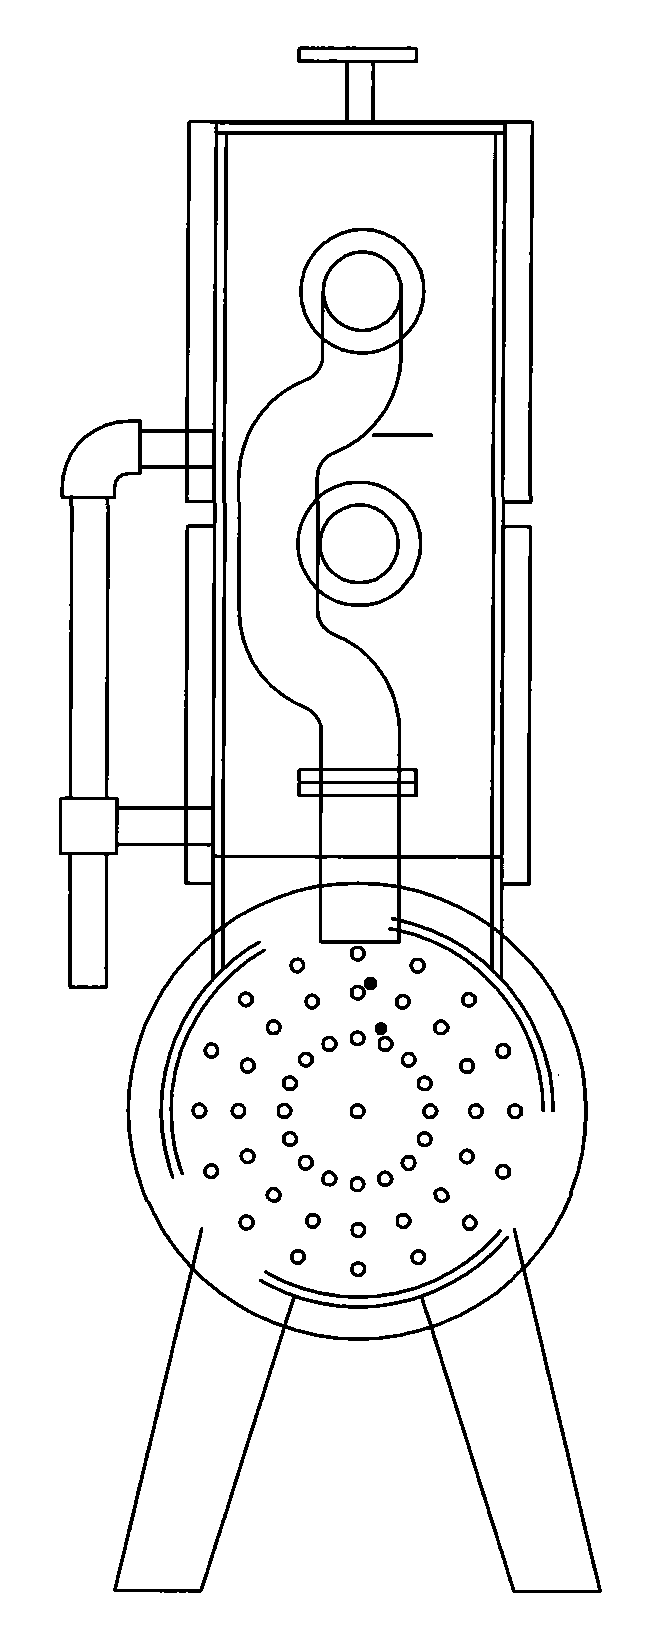 Composite filtering equipment for biomass gas